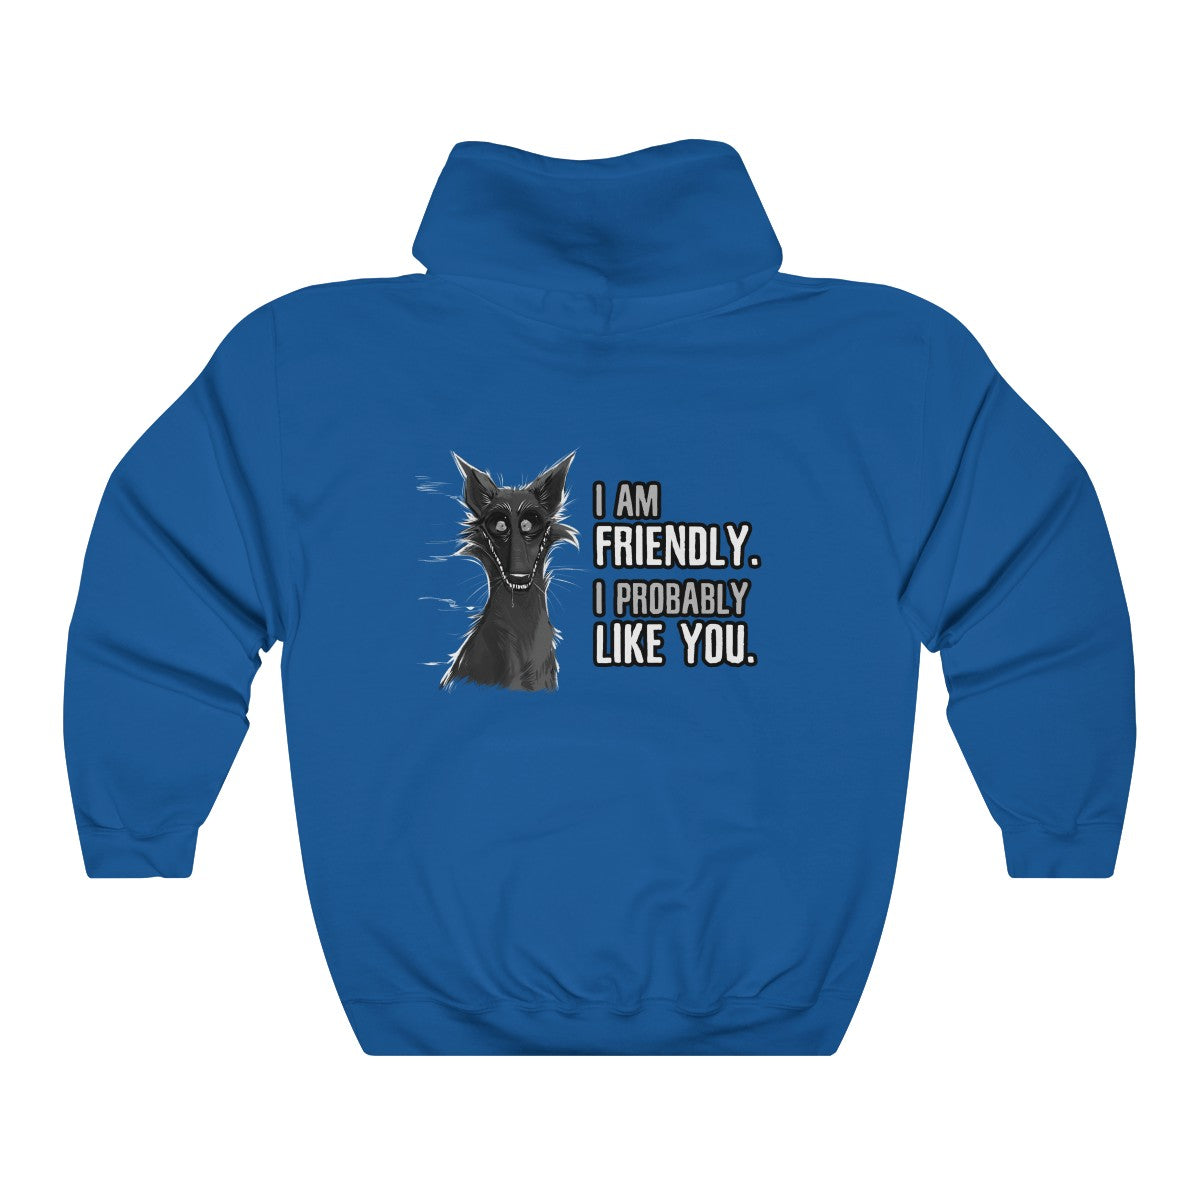 I probably DON'T hate you - Hoodie Hoodie Cyamallo Royal Blue S 